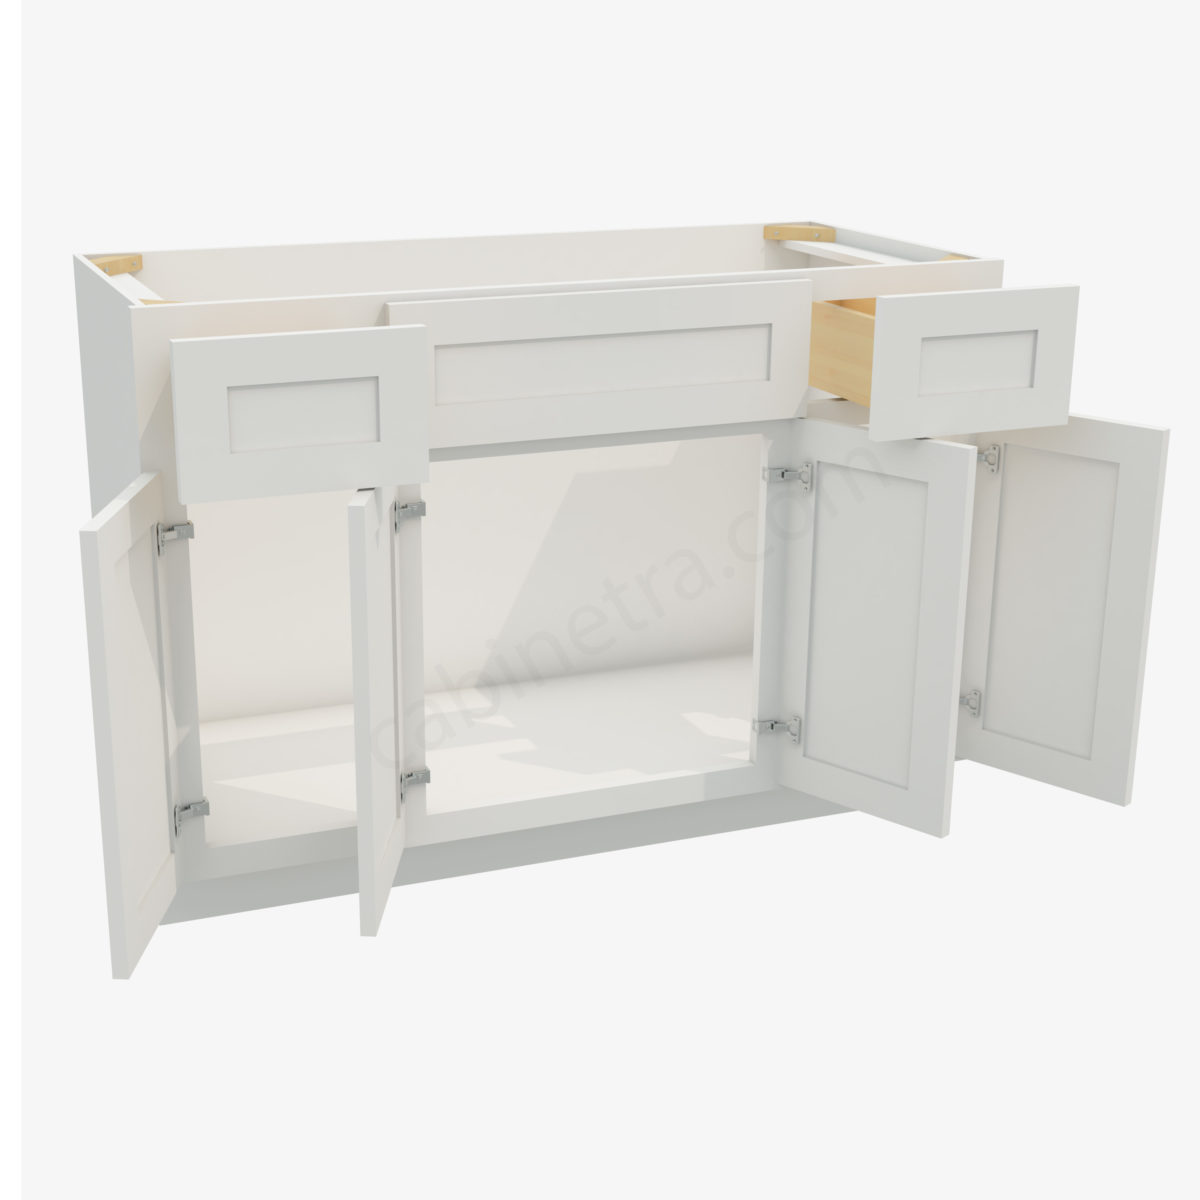 AW S4821B12D 34 1 Forevermark Ice White Shaker Cabinetra scaled